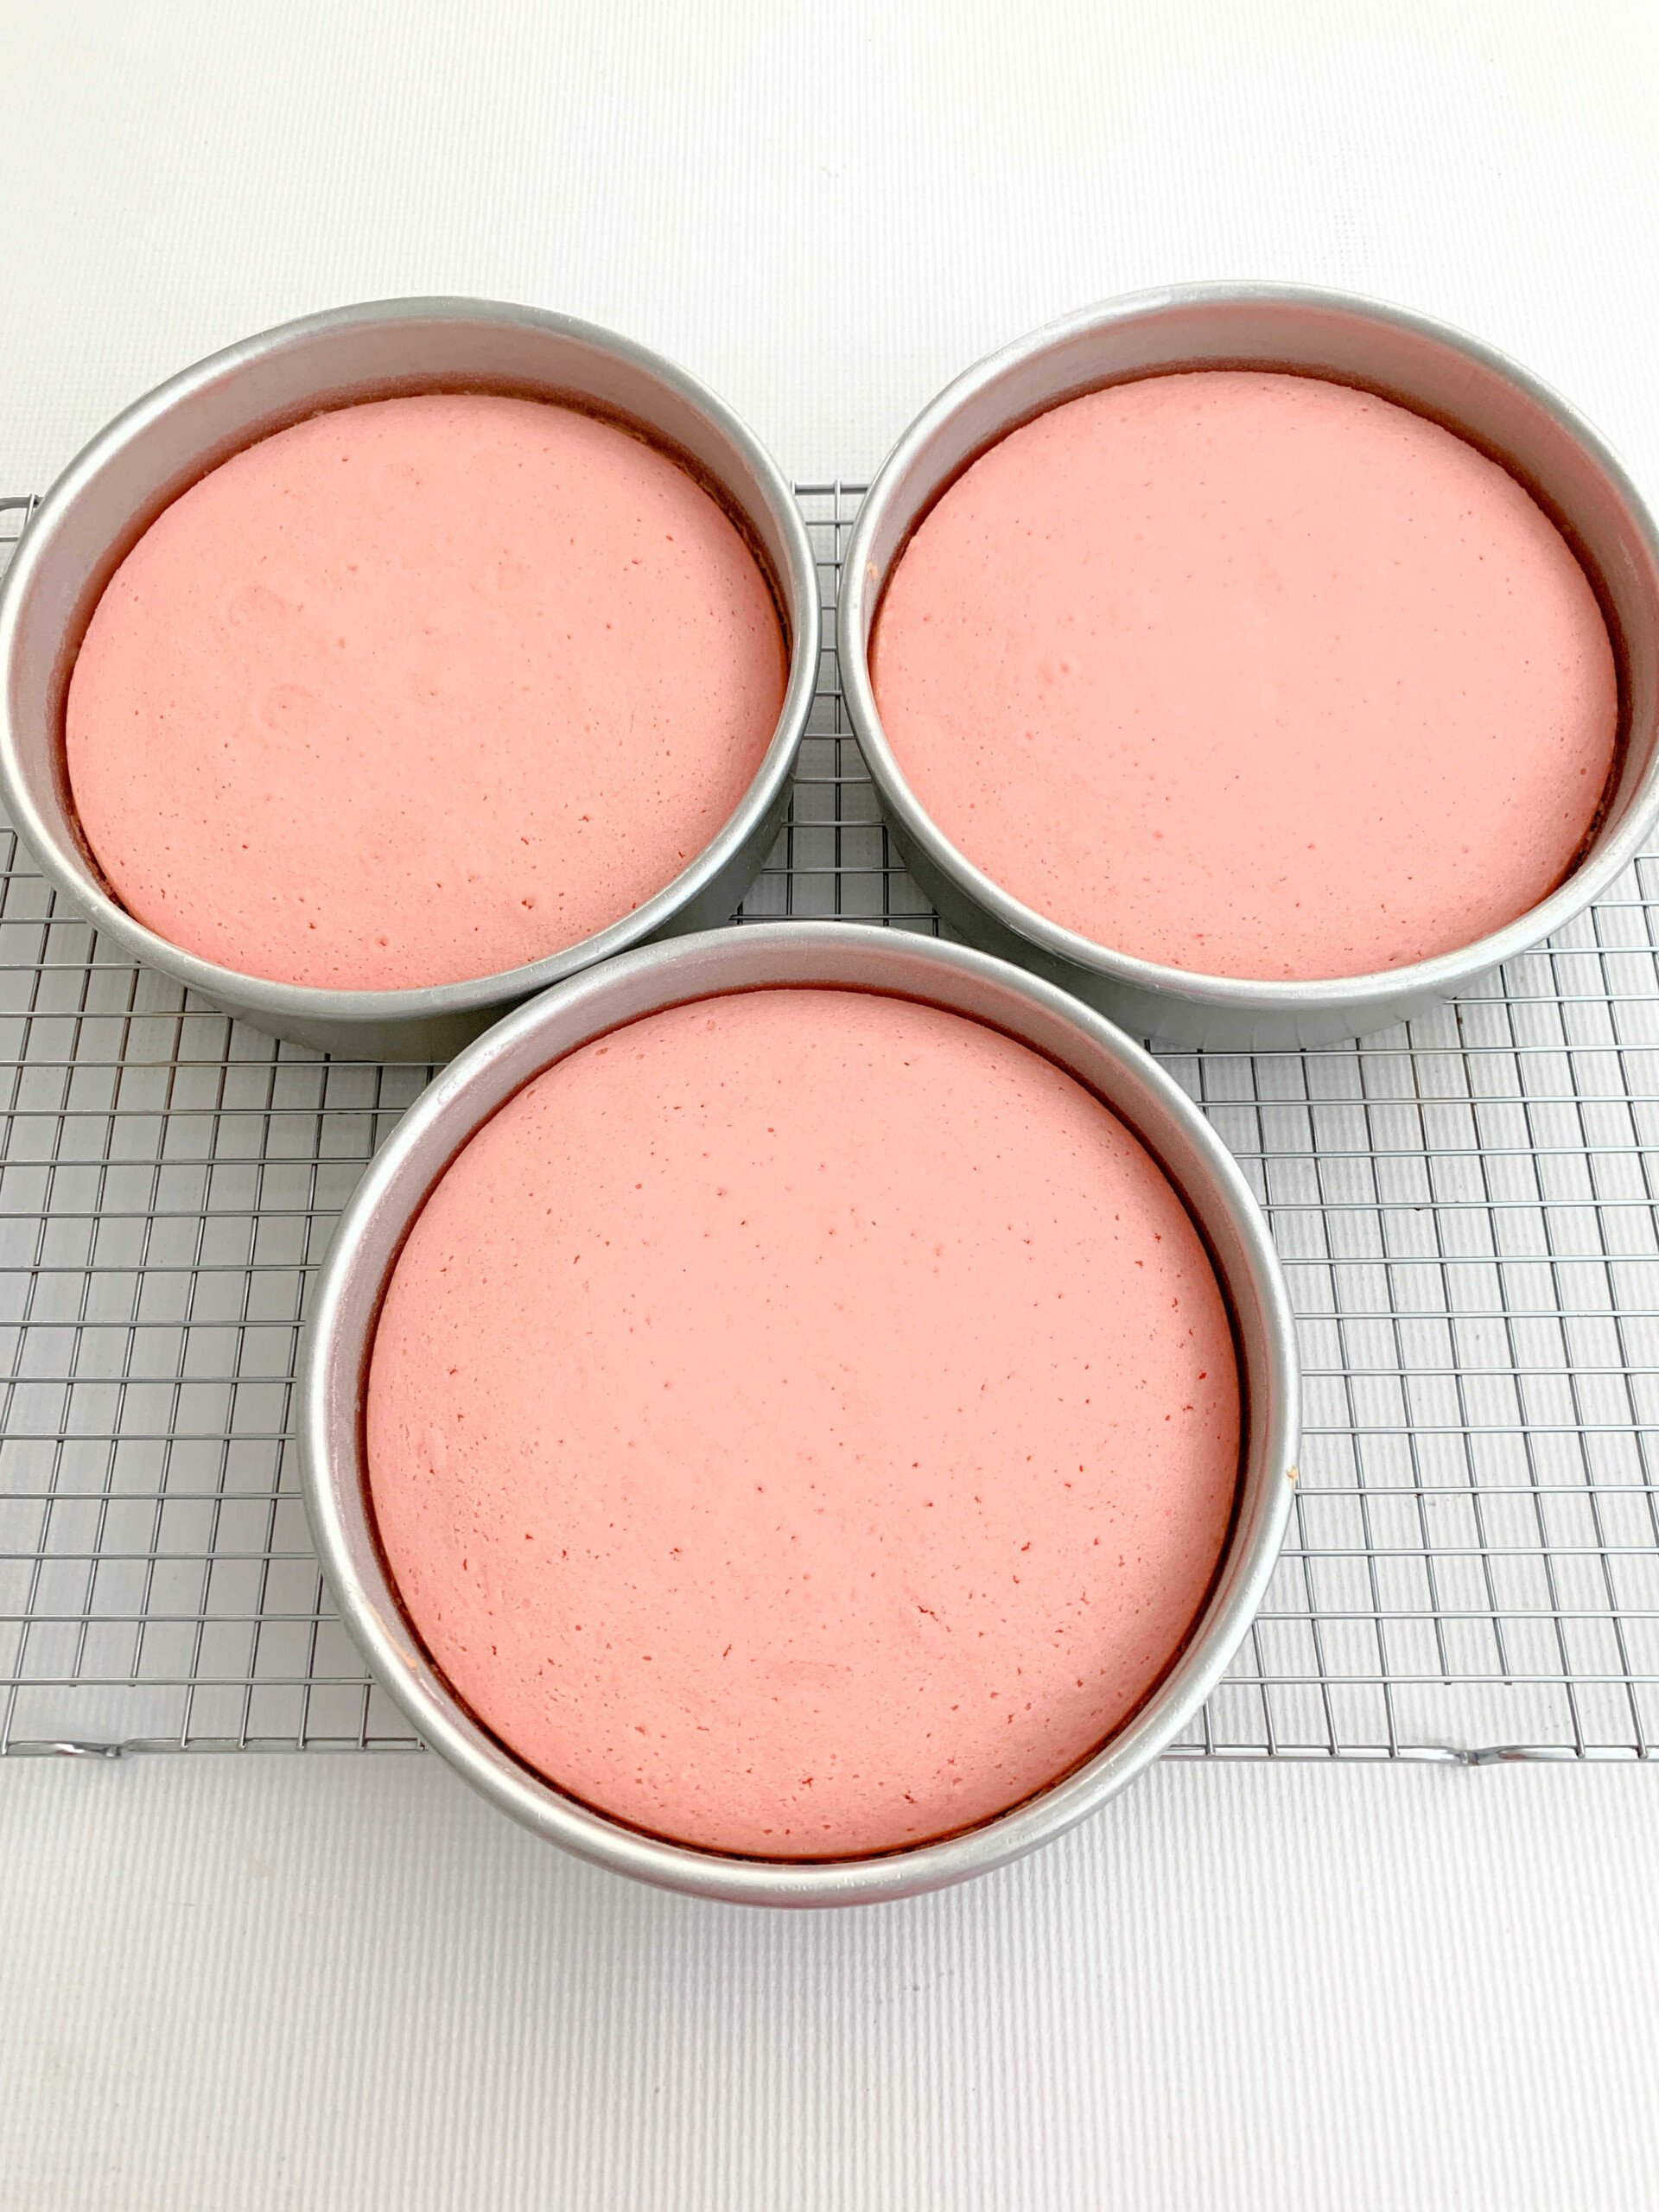 Freshly baked Pink Velvet Cake Layers, in pans on a cooling rack.